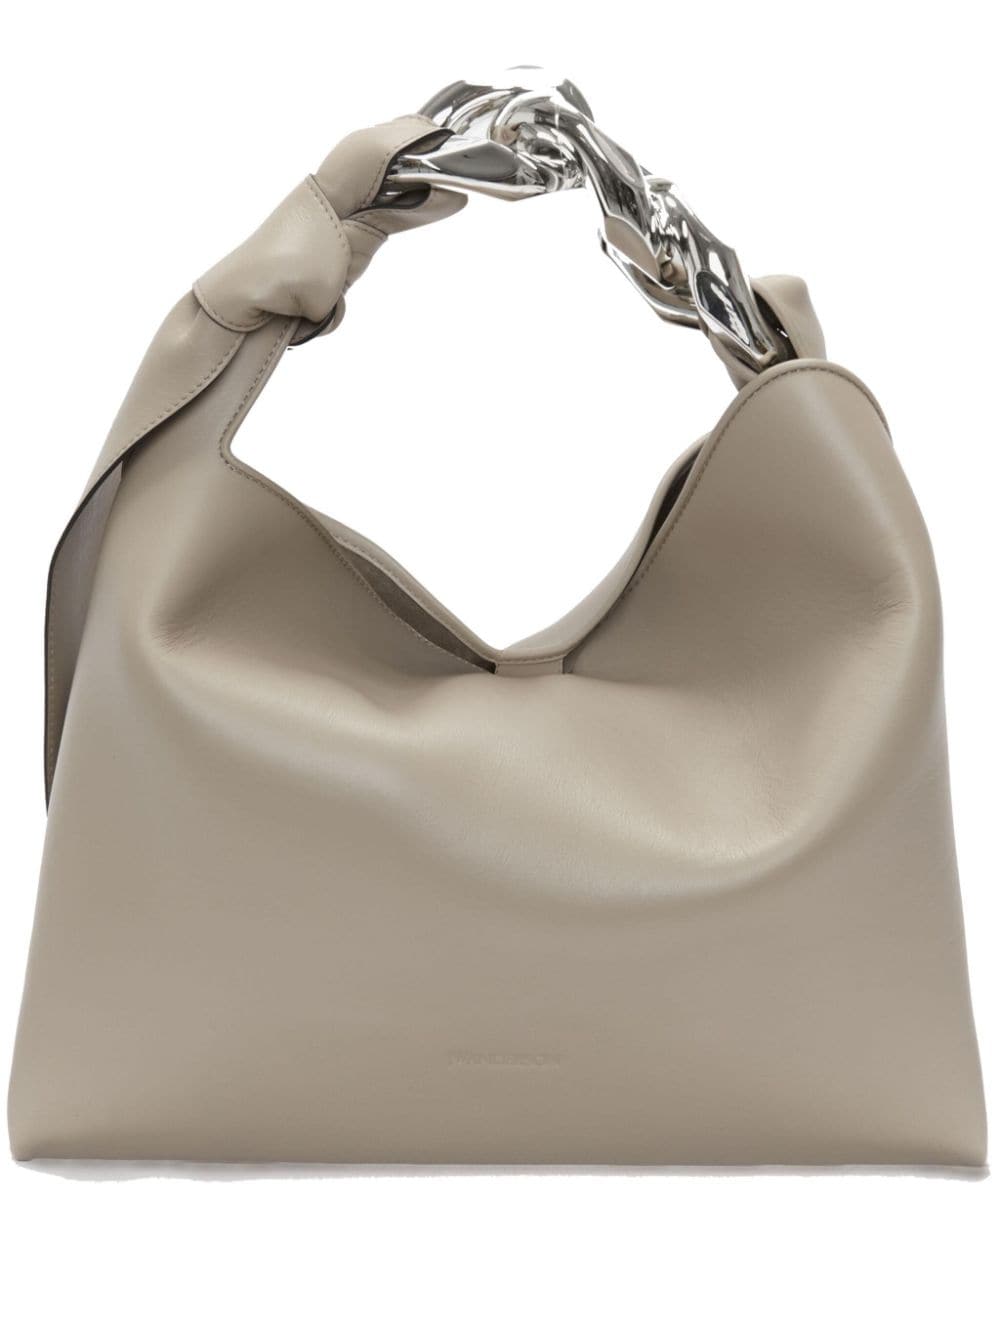 JW Anderson small Chain Hobo shoulder bag - Neutrals